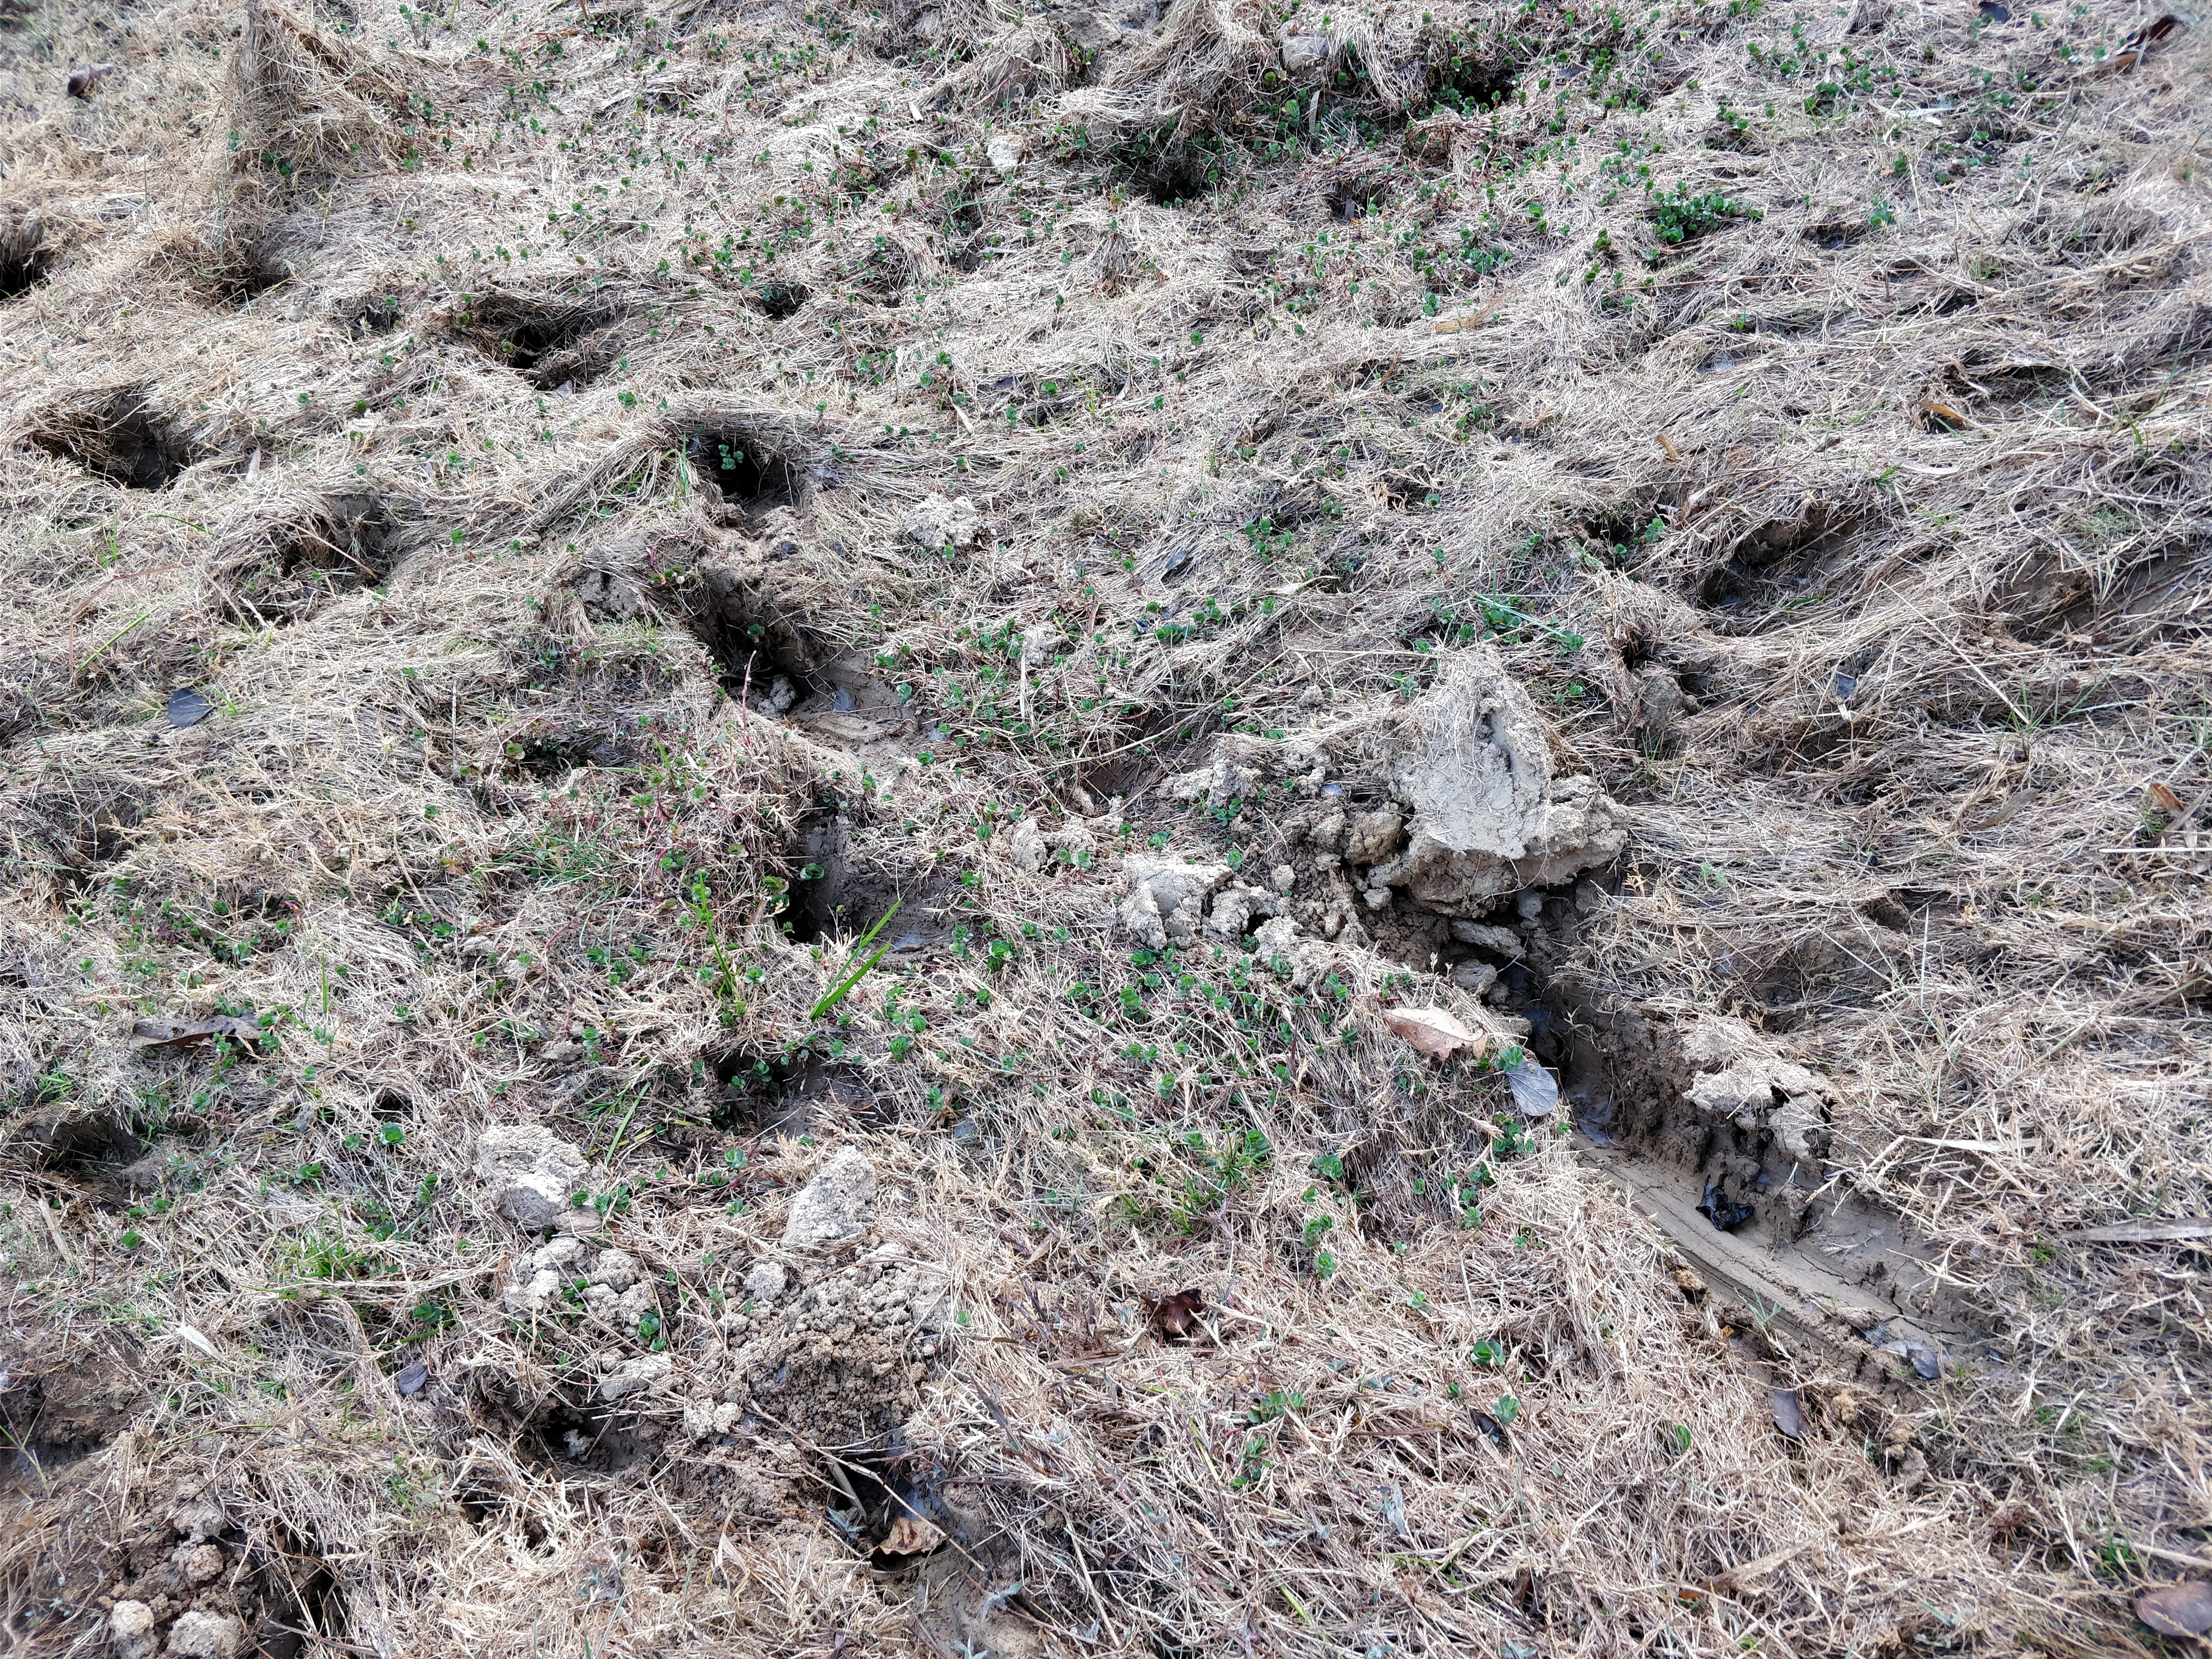 fresh hoof marks near the lake - possibly made by wild bisons - Gaurs - bhimgad wildlife sanctuary